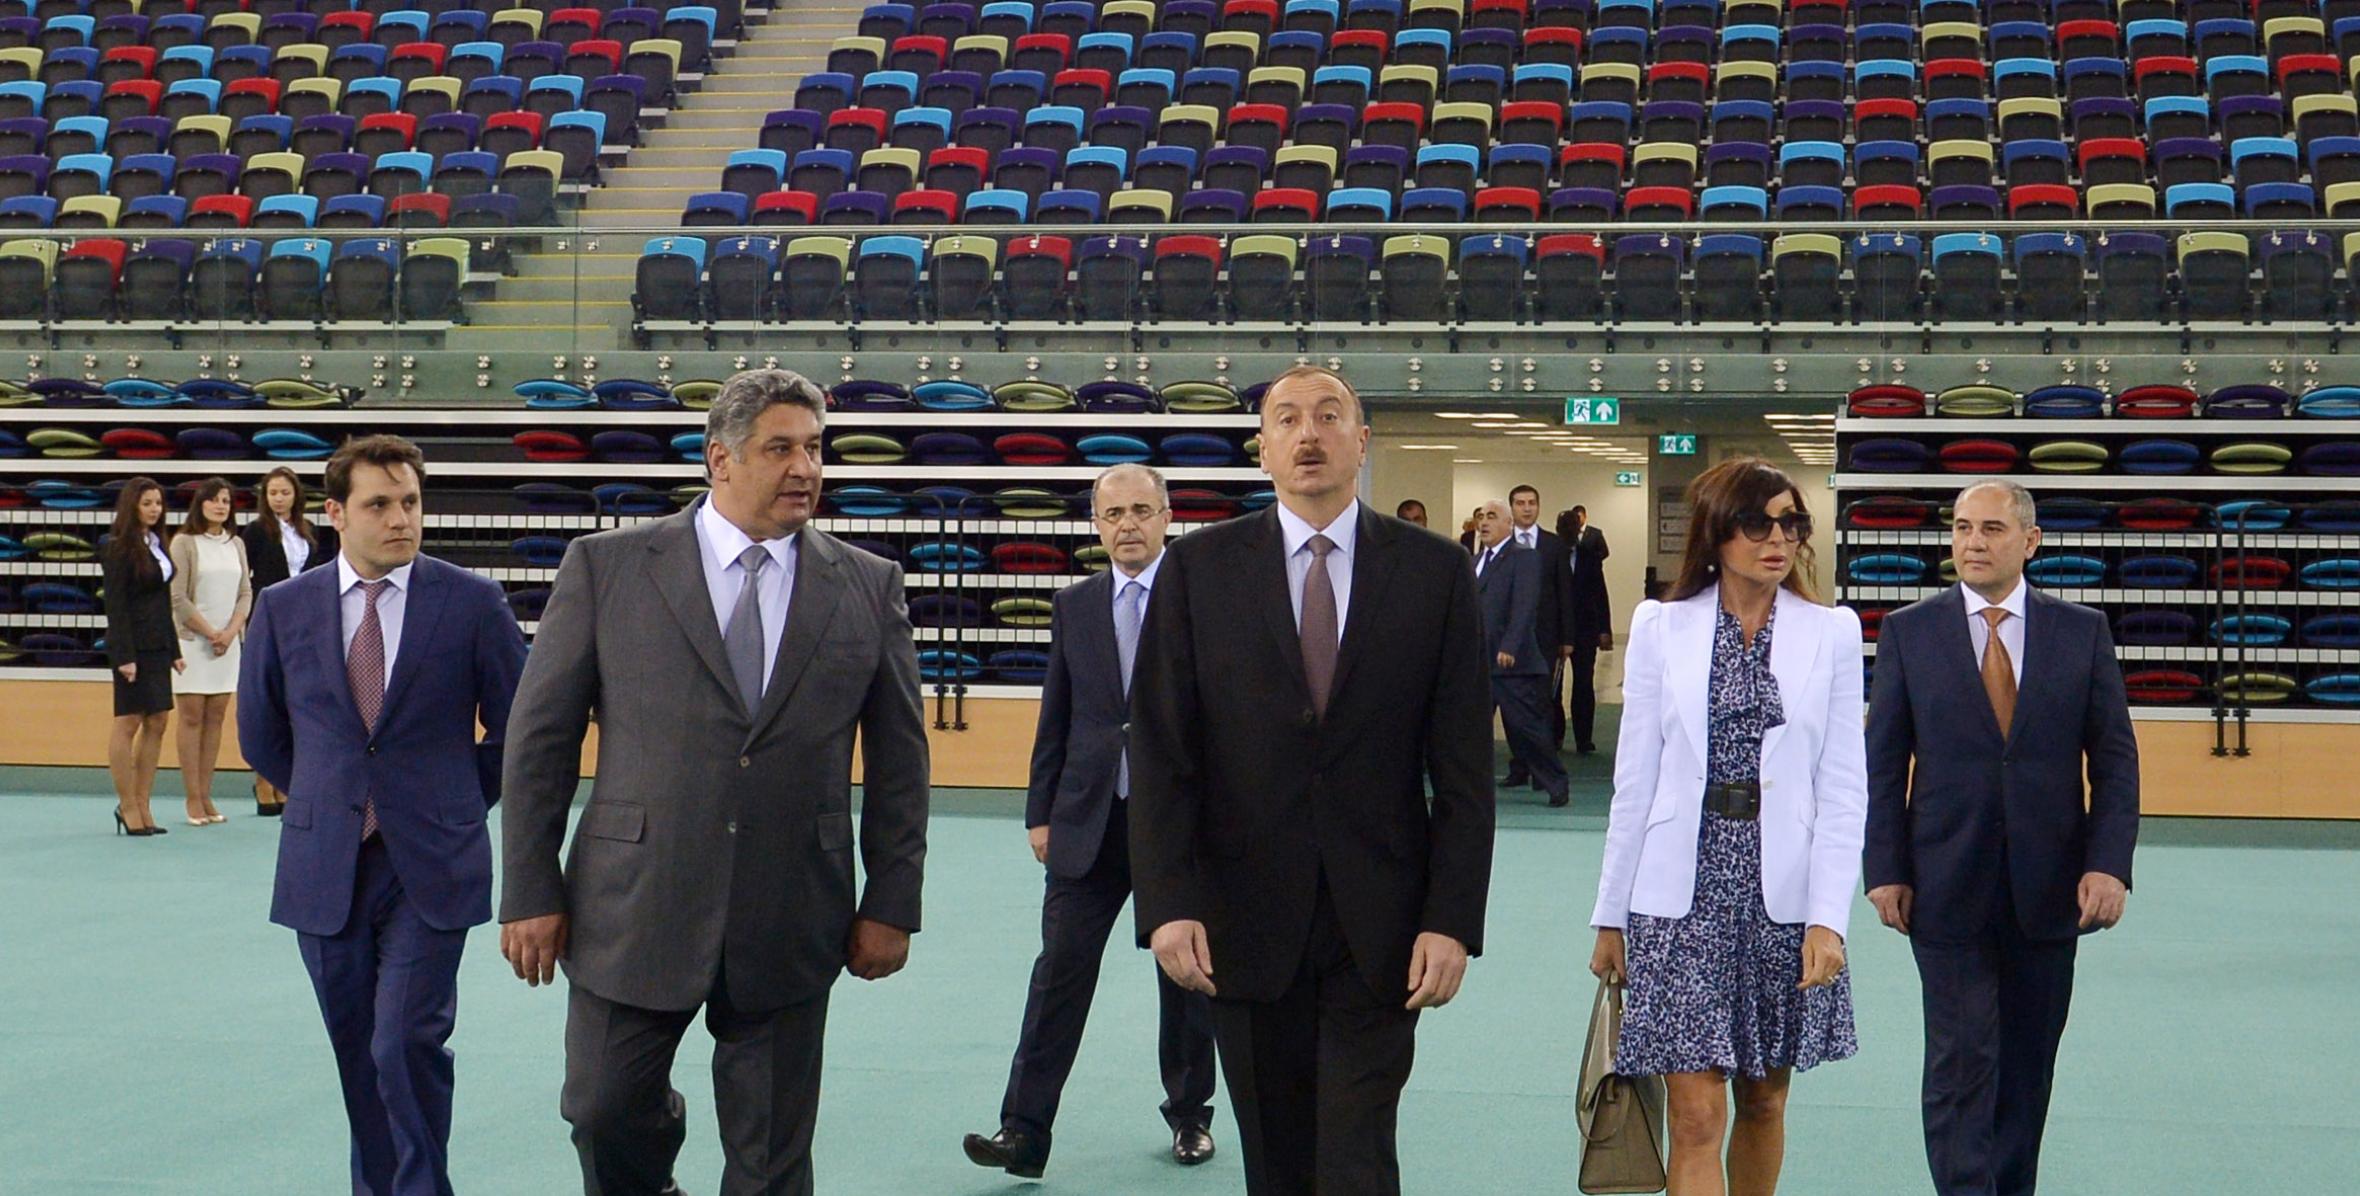 Ilham Aliyev attended the opening ceremony of the National Gymnastics Arena in Baku